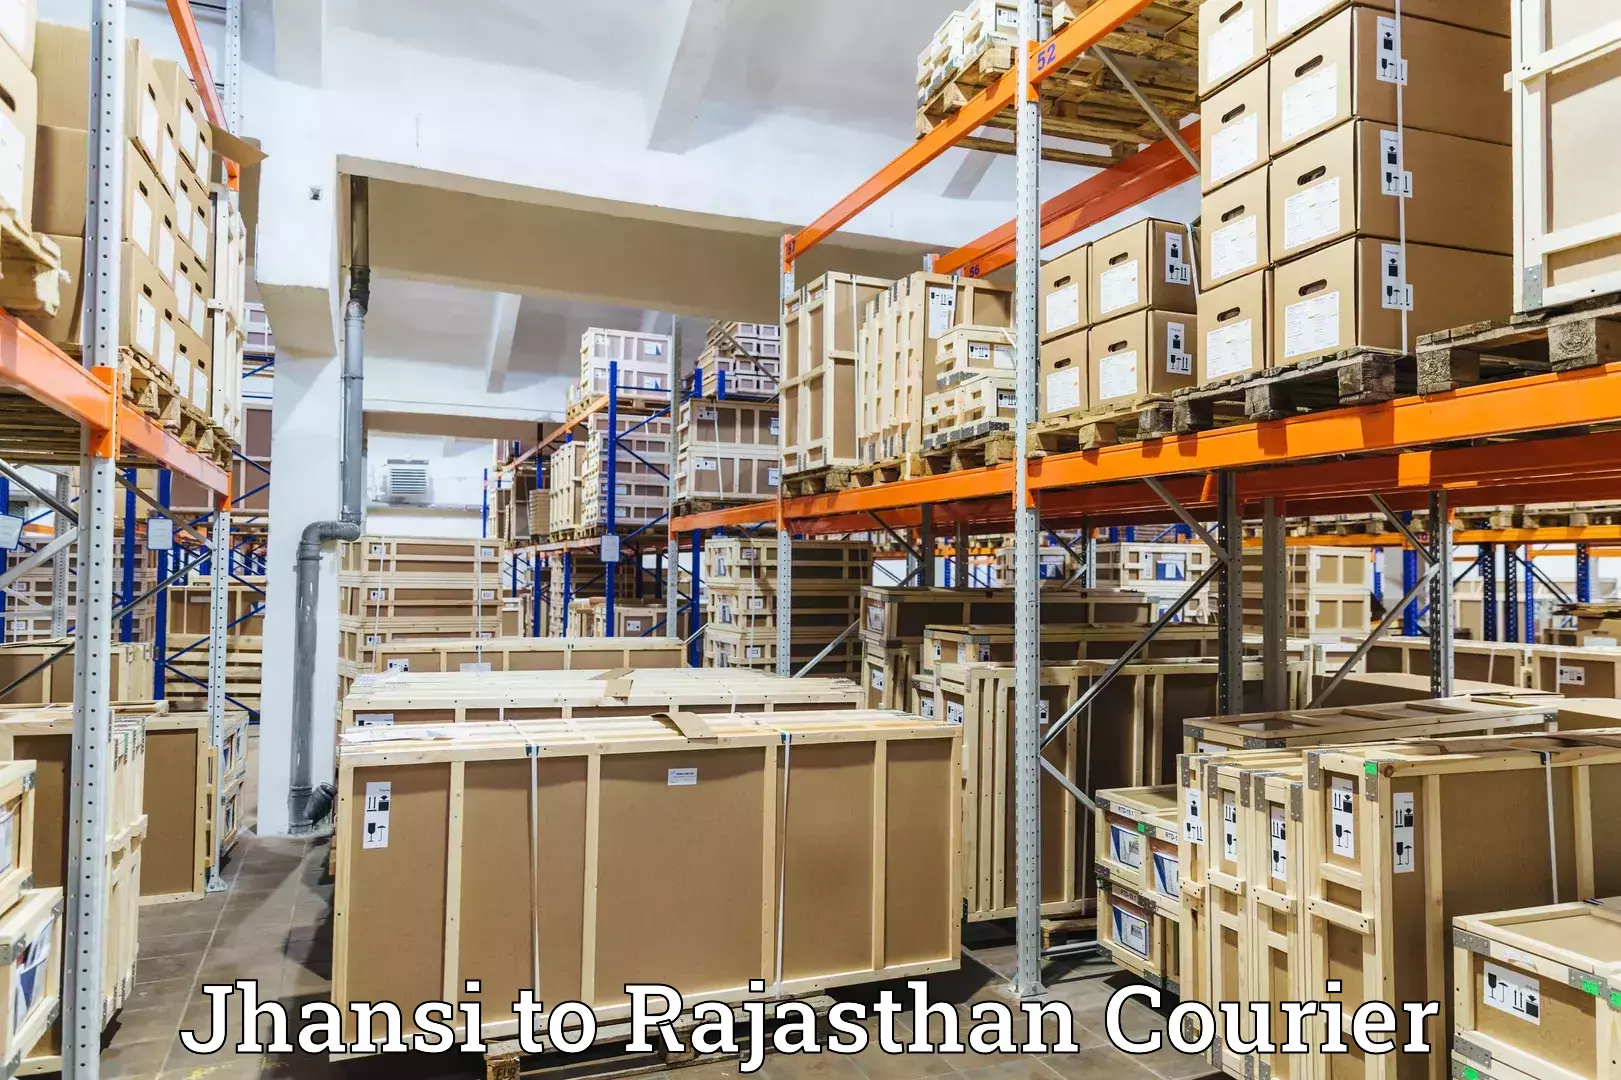 Multi-national courier services Jhansi to Ajmer